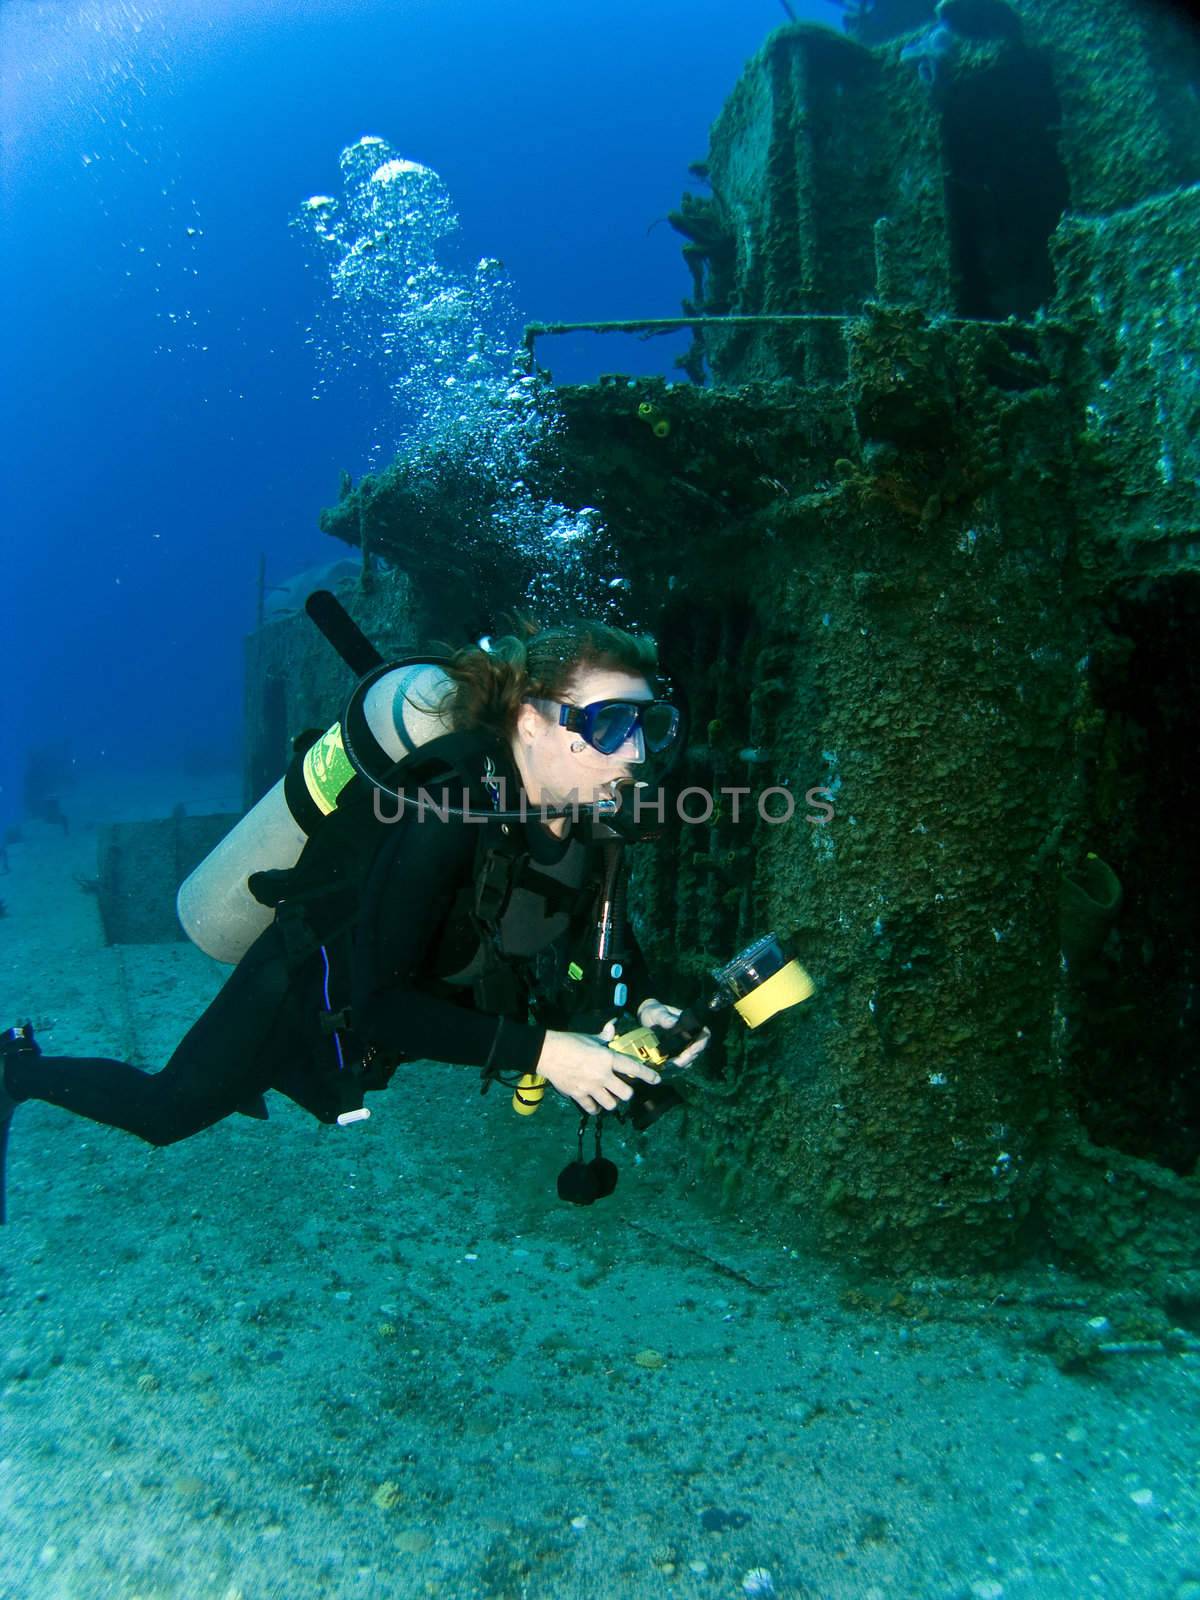 Female Underwater Photographer by KevinPanizza